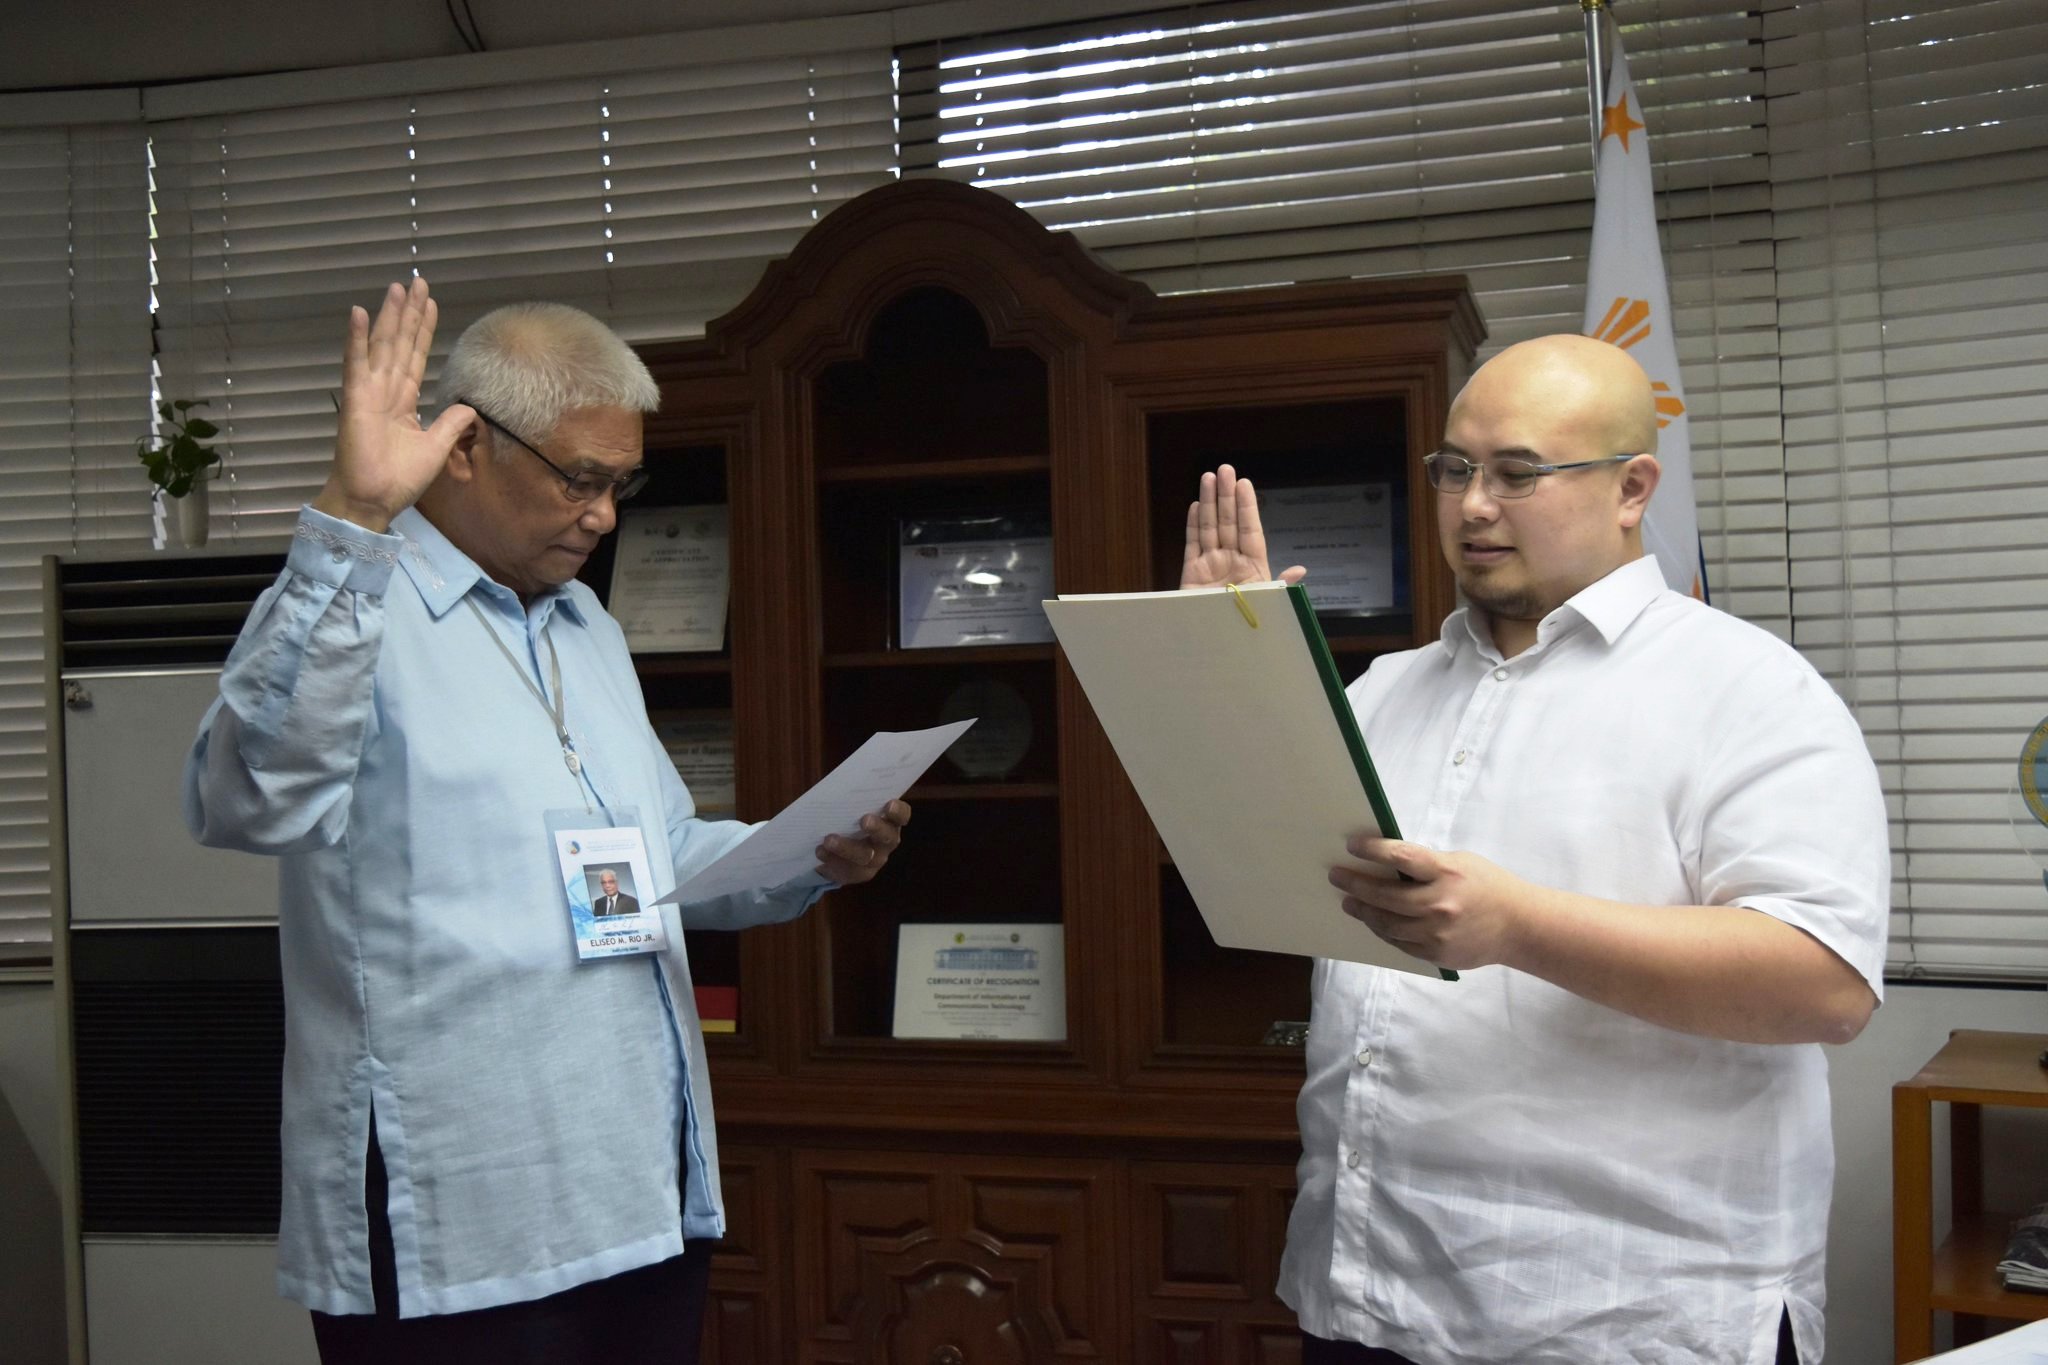 DICT names new assistant secretary for management, operations